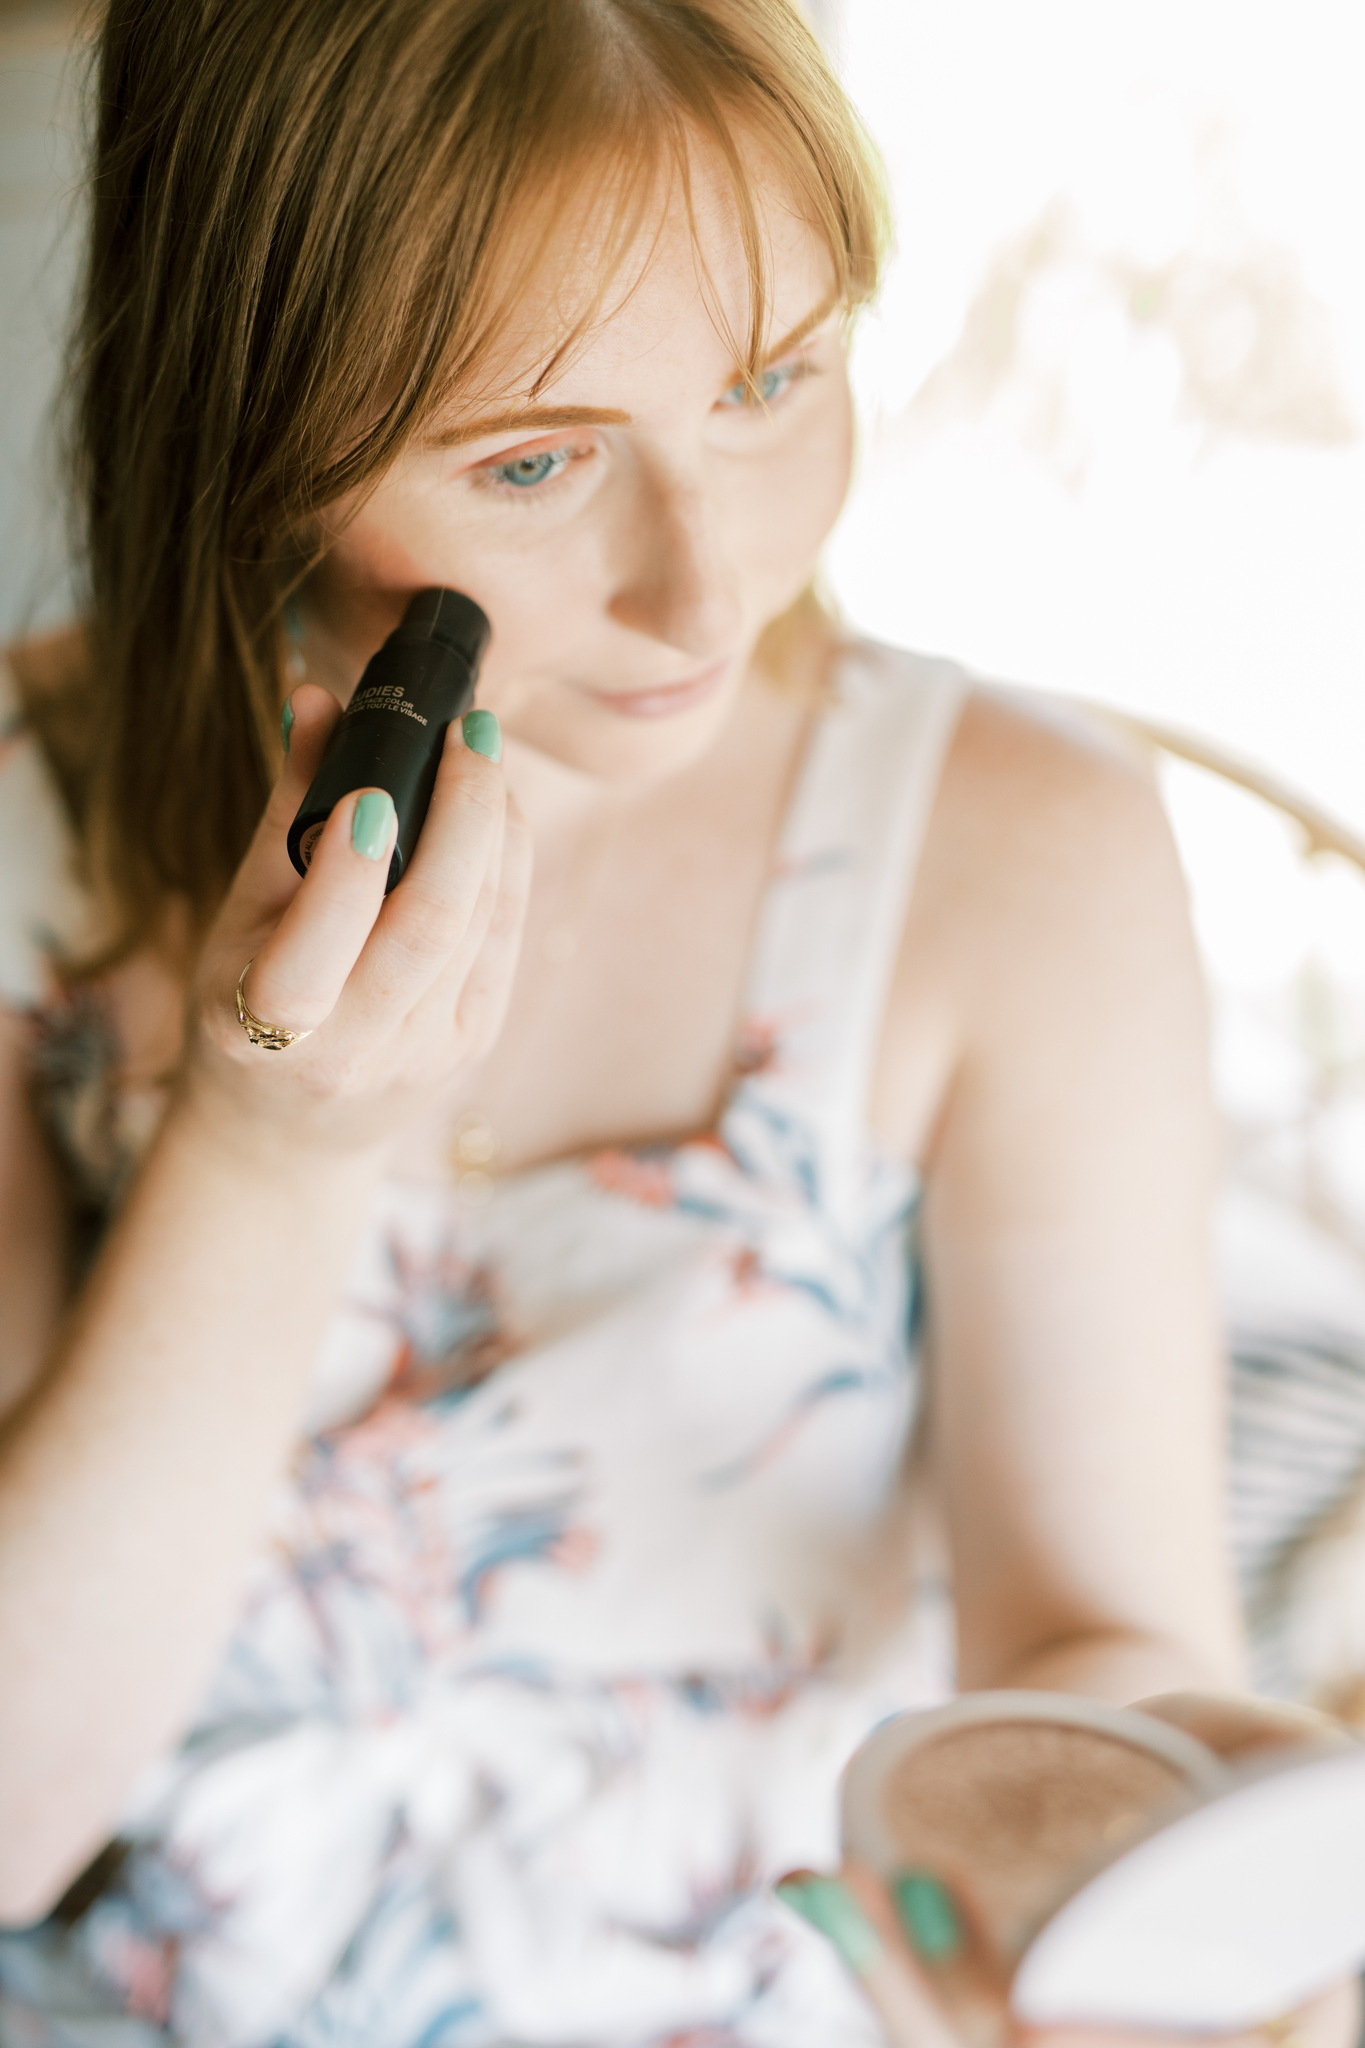 Affordable by Amanda shares her summer makeup tutorial | she is holding a NUDESTIX nudies matte blush & bronze product and applying the shade Bare Back to her cheeks. 